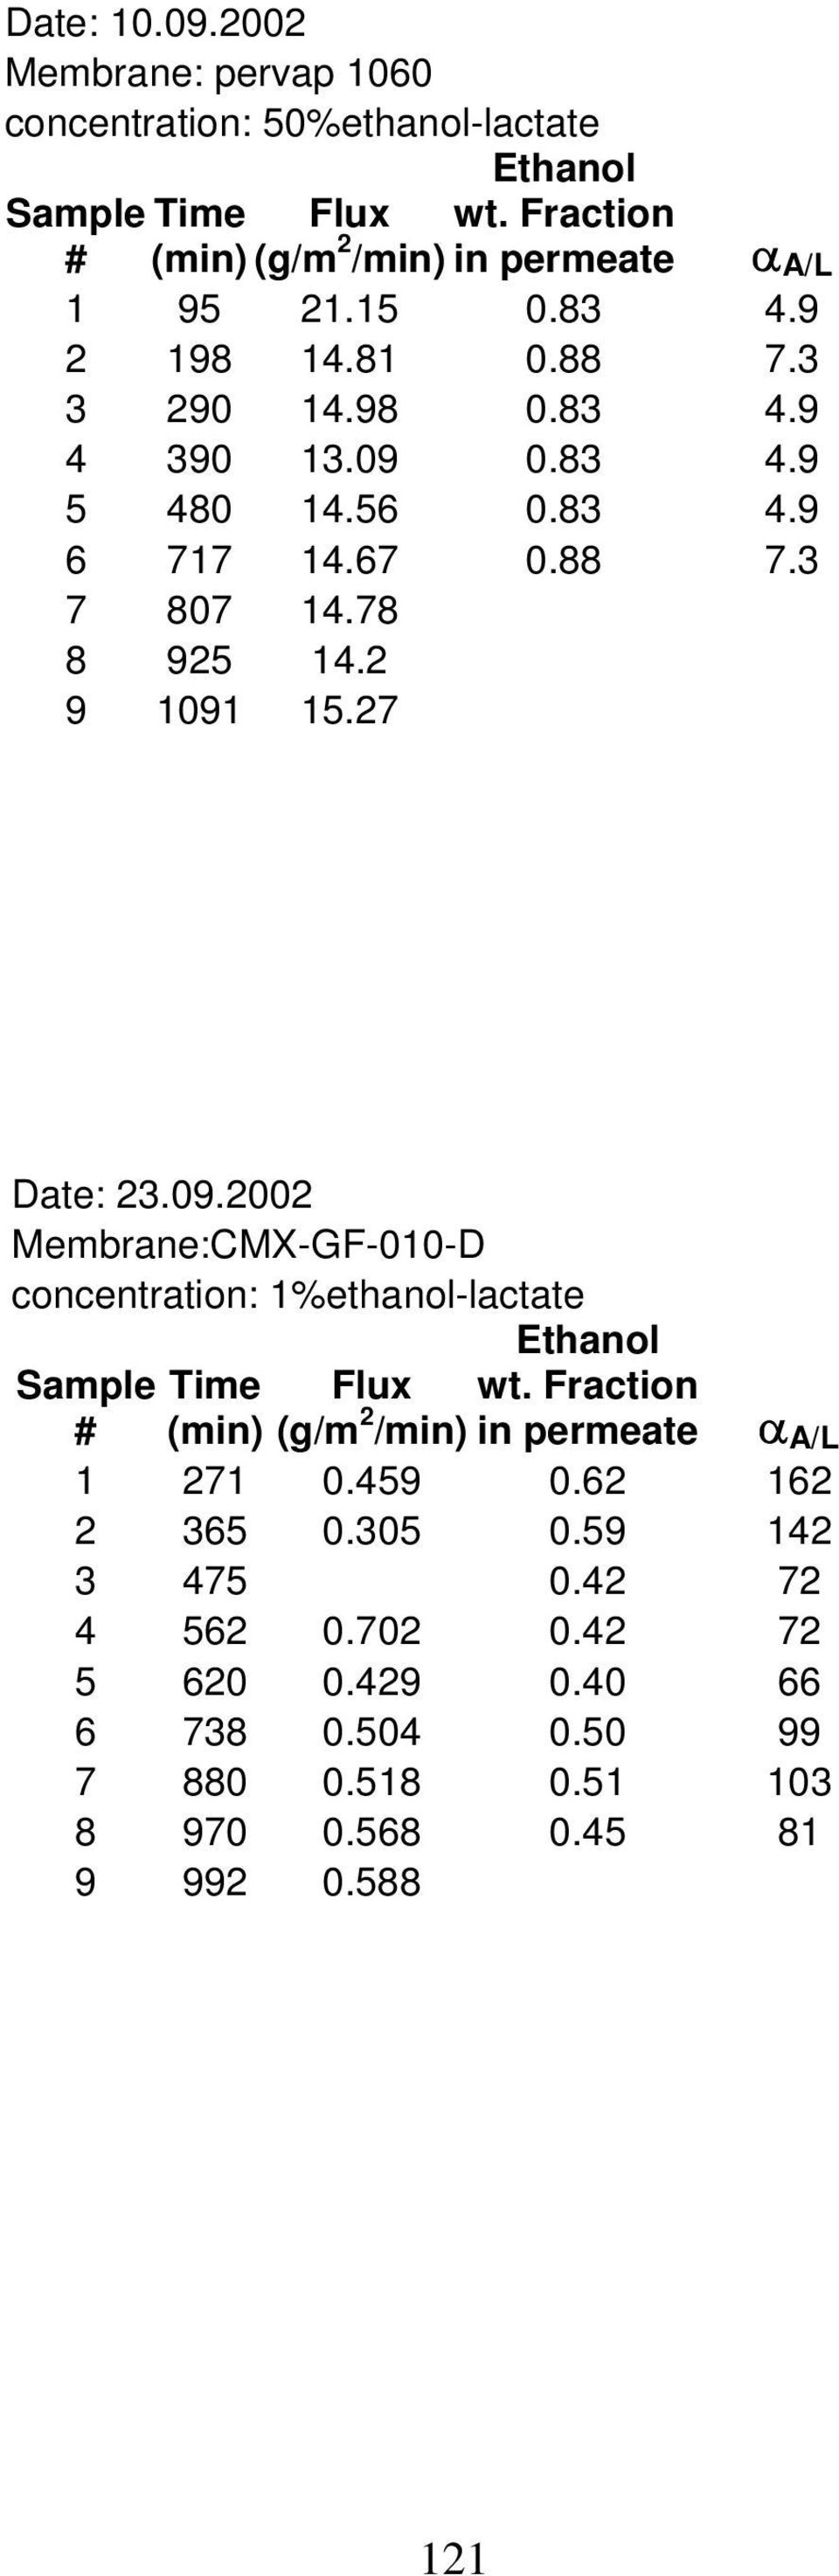 2 9 1091 15.27 Date: 23.09.2002 concentration: 1%ethanol-lactate # (min) (g/m 2 /min) in permeate 1 271 0.459 0.62 162 2 365 0.